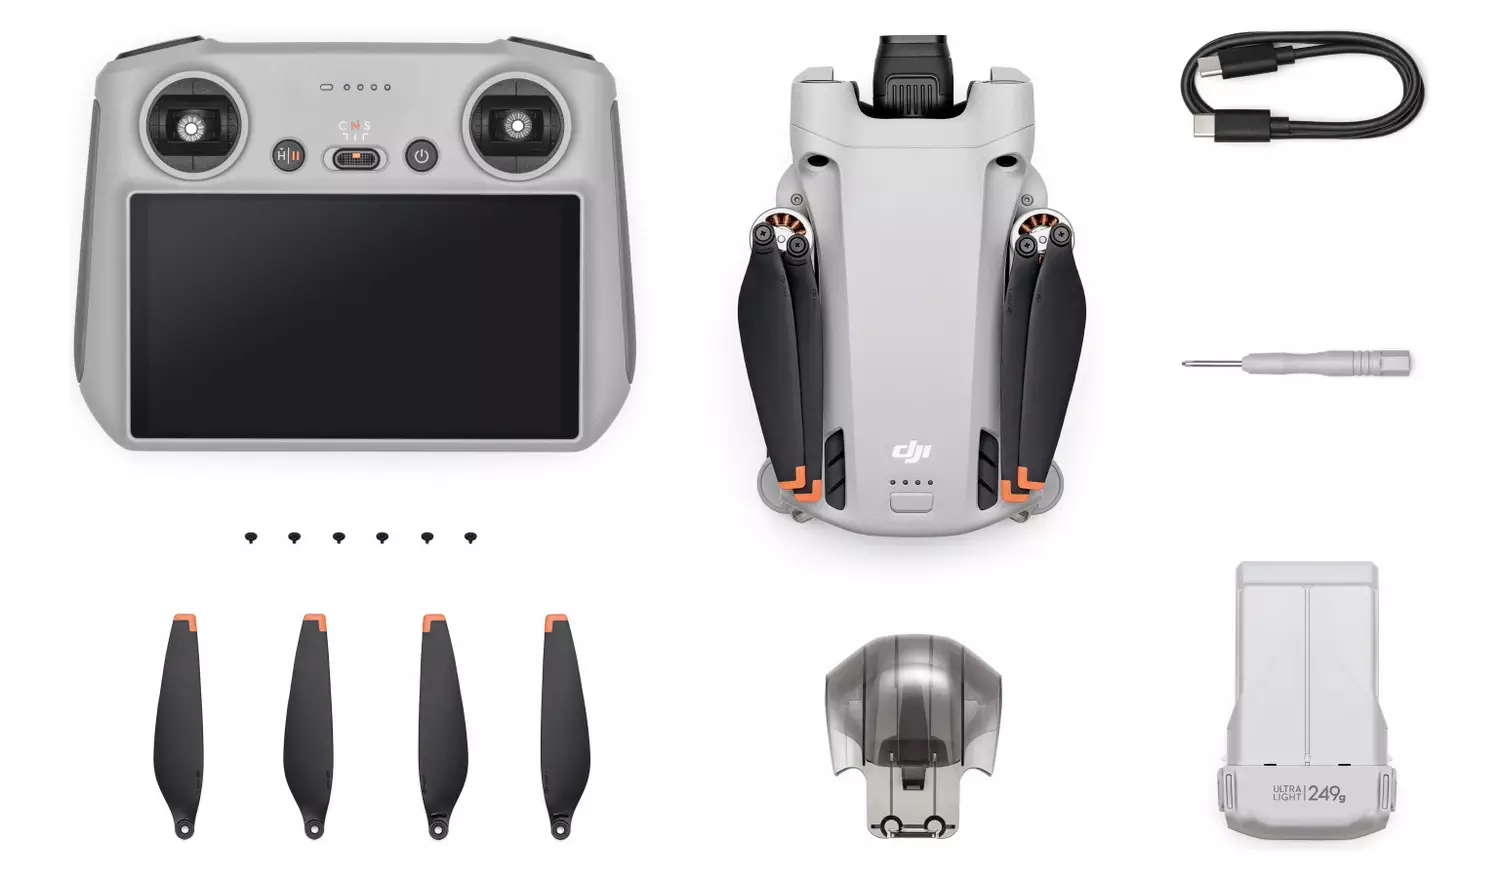 DJI Mini 3 Pro: UK retailer reveals high-resolution images, pricing,  specifications and Fly More Kit as specific release date emerges -   News